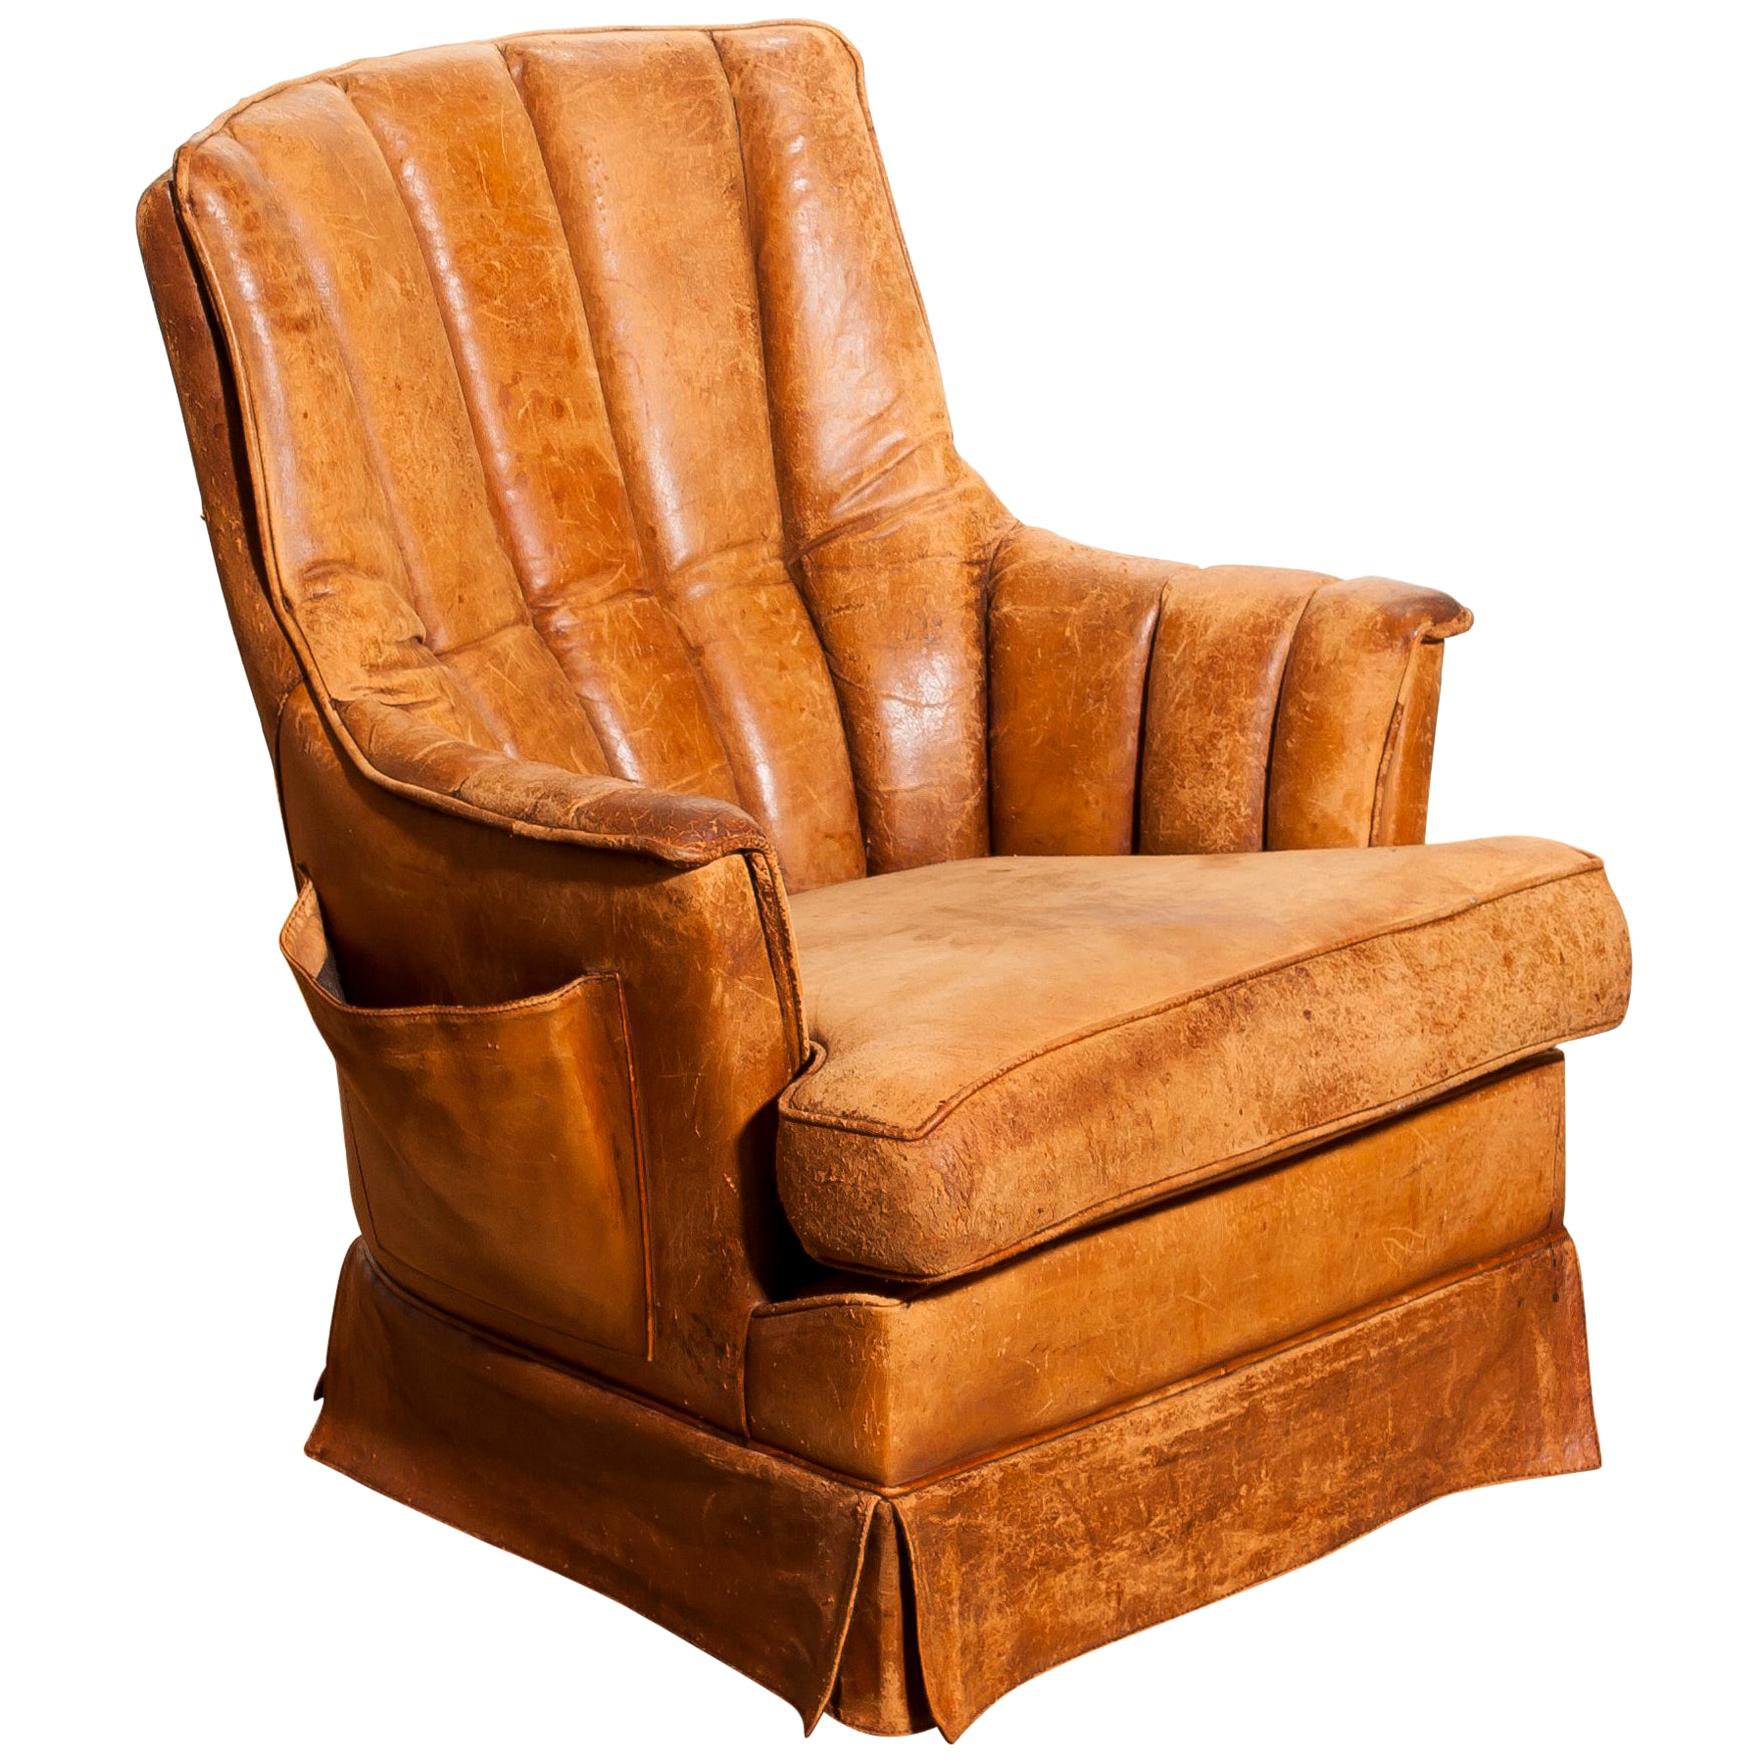 Fantastic club armchair from France.
This chair is made of leather with a skirt and a magazine bag on its side.
It has a greatly used patina.
Period: 1940s.
Dimensions: H 85 cm x W 75 cm x D 68 cm x SH 46 cm.